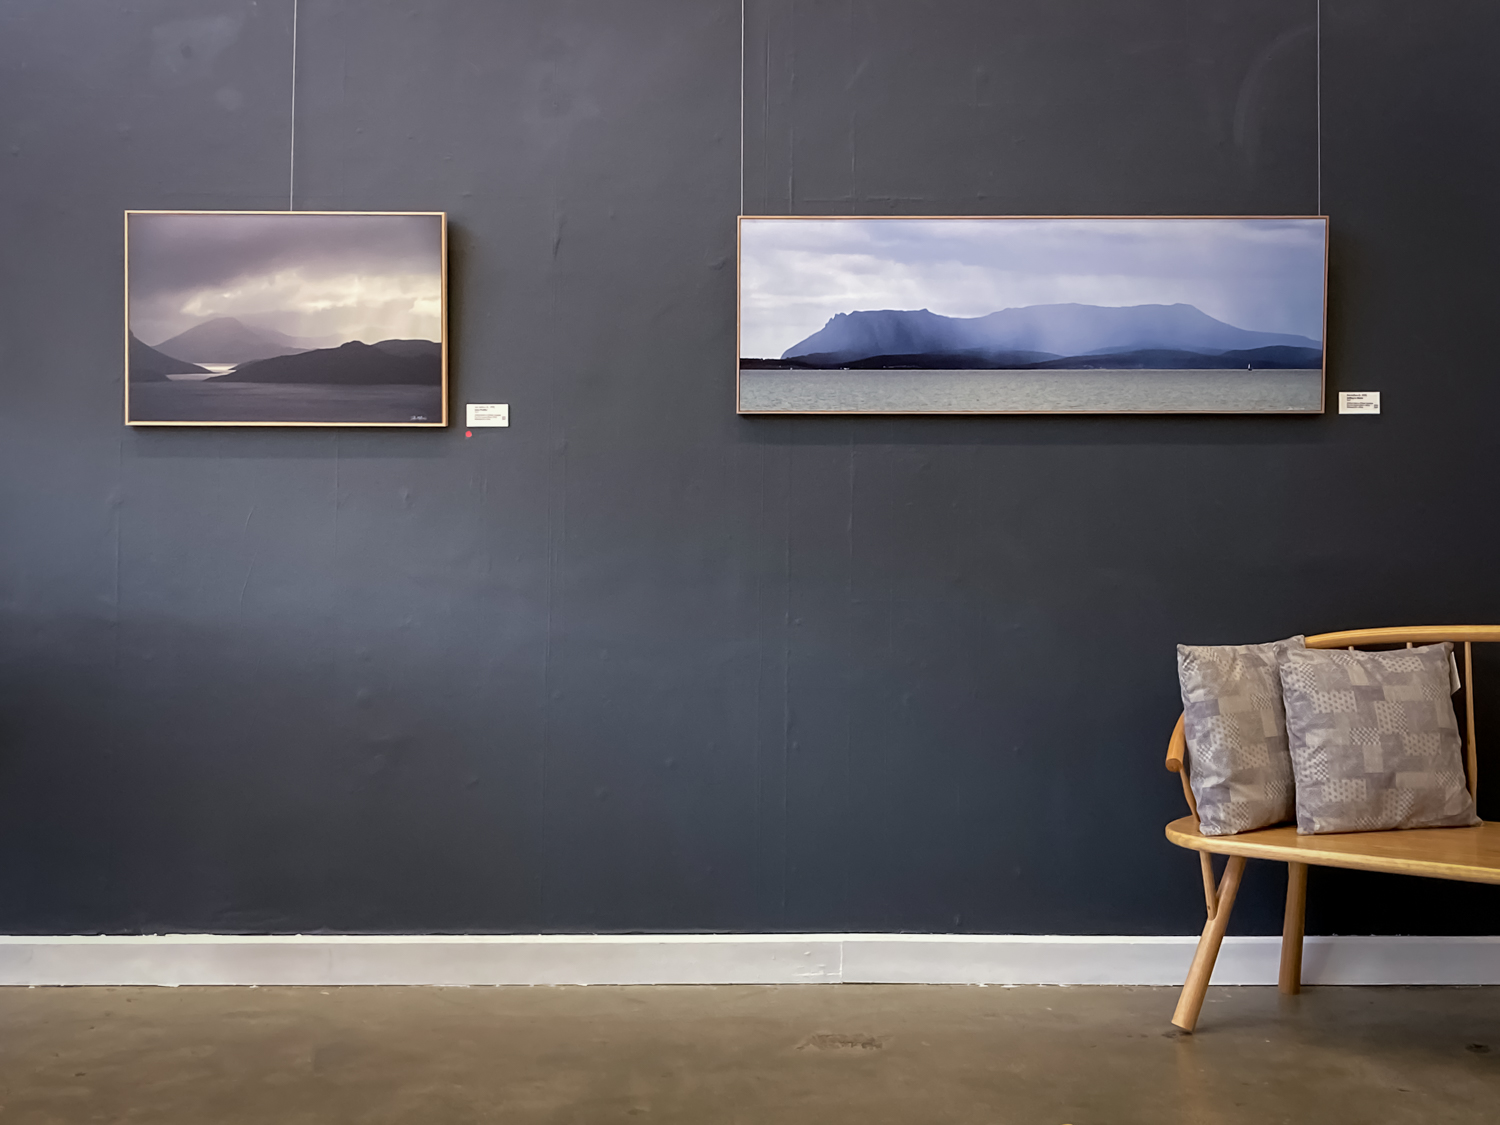 Two landscape photographs hung on a dark grey wall with a cane chair in the foreground